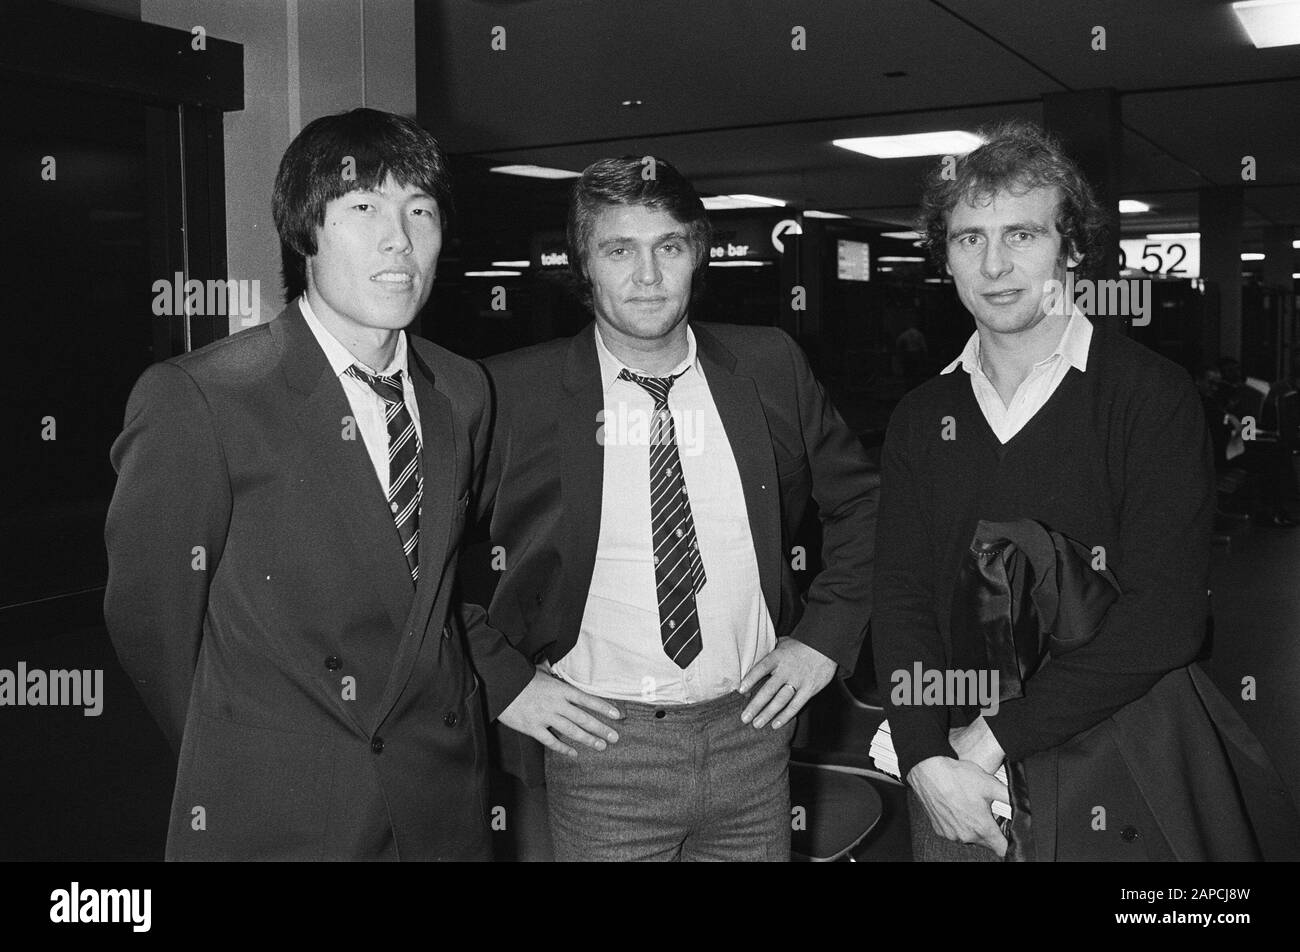 Arrival of the Eintracht Frankfurt football team at Schiphol due to the UEFA Cup match against Feyenoord; v.l.n.r. Cha, trainer Rausch and Hölzenbein Date: 11 December 1979 Location: Noord- Holland, Schiphol Keywords: sport, trainers, airports, football Personal name: Cha Bum-Kun, Hölzenbein, Bernd, Rausch, Friedel Institution name: Feyenoord Stock Photo